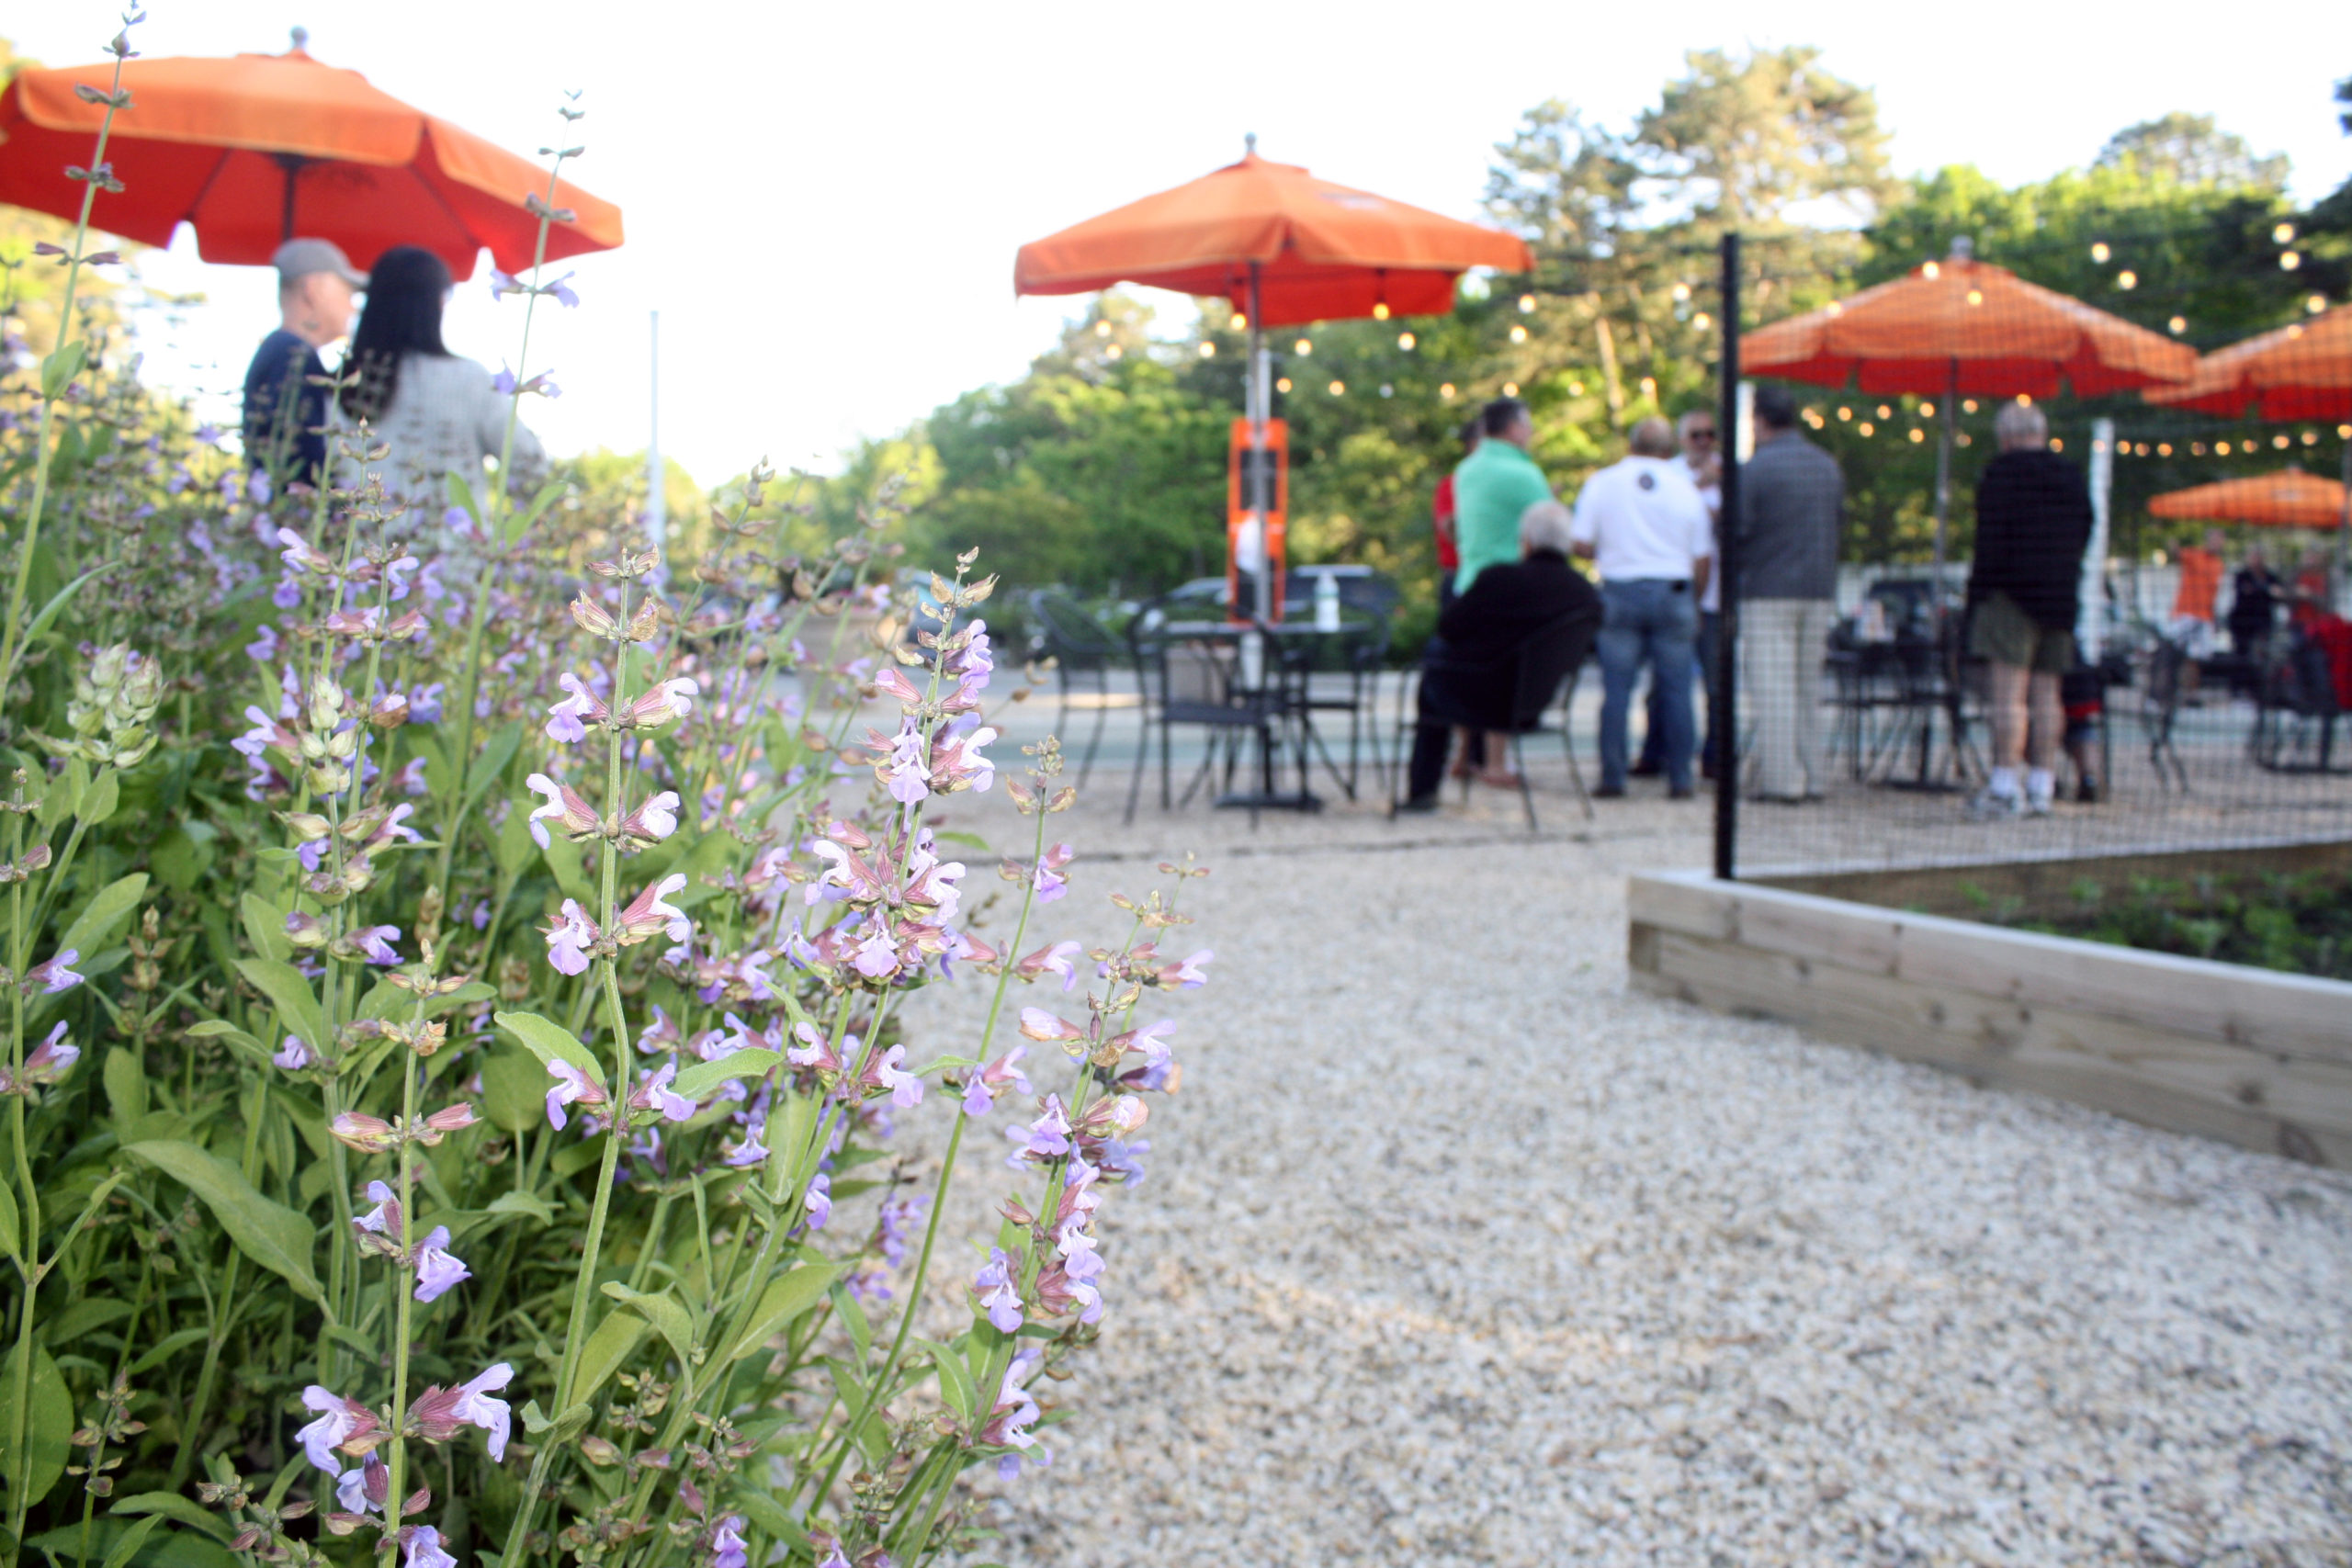 Lavender growing in Centro Trattoria & Bar's new outdoor dining area.